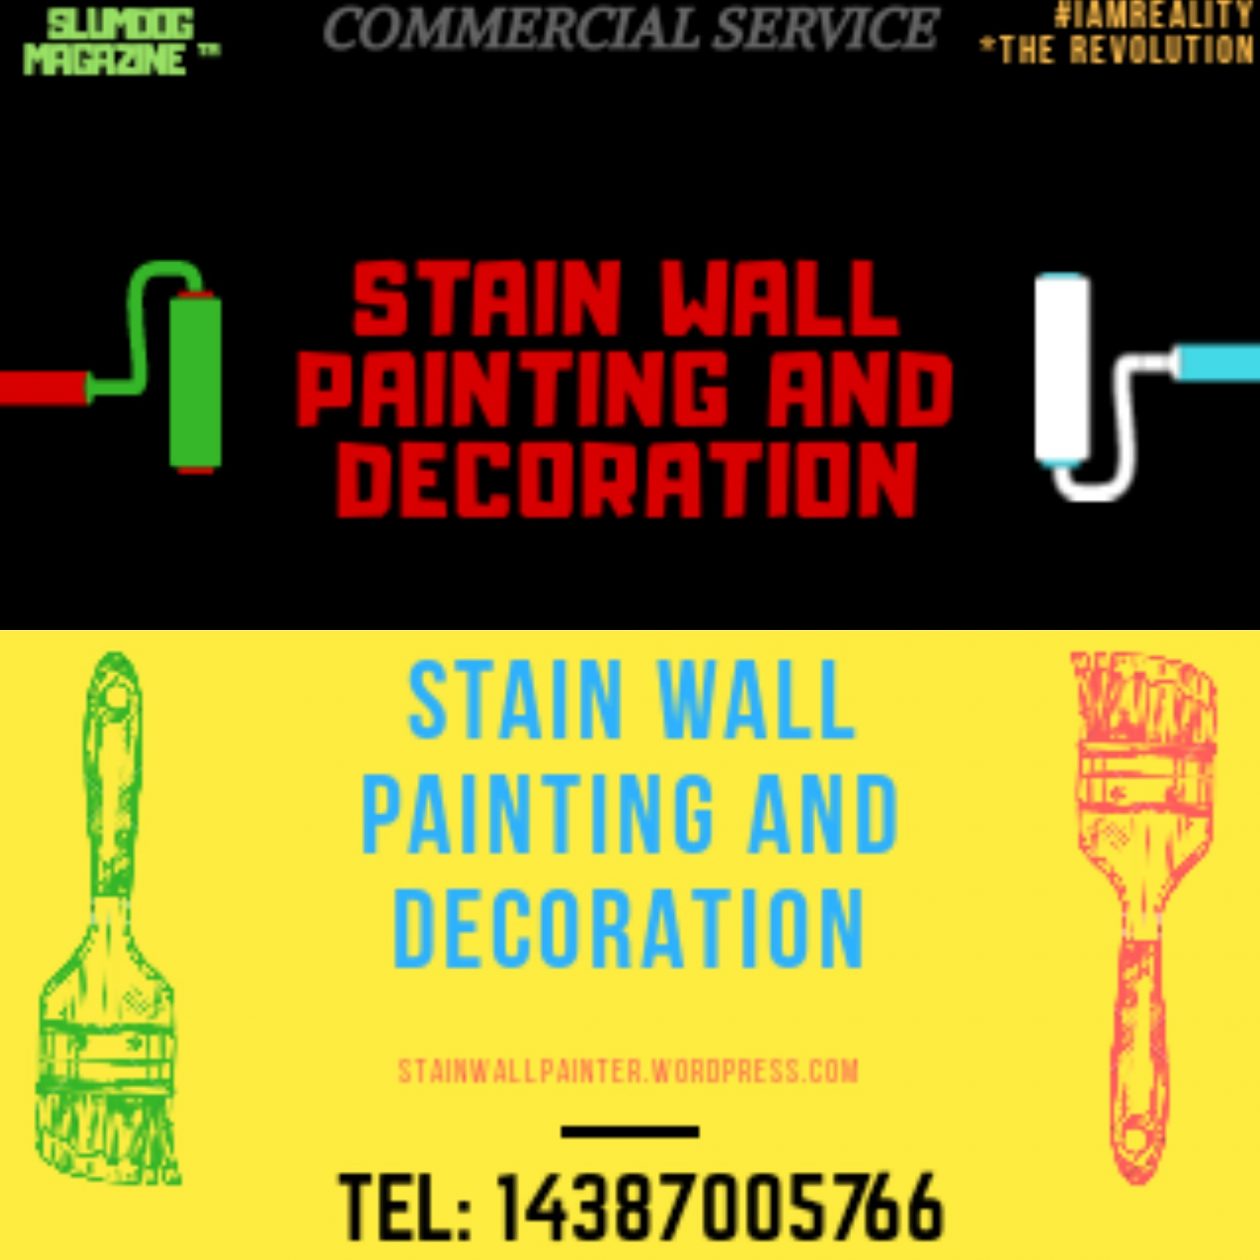 STAIN WALL PAINTING AND DECORATION